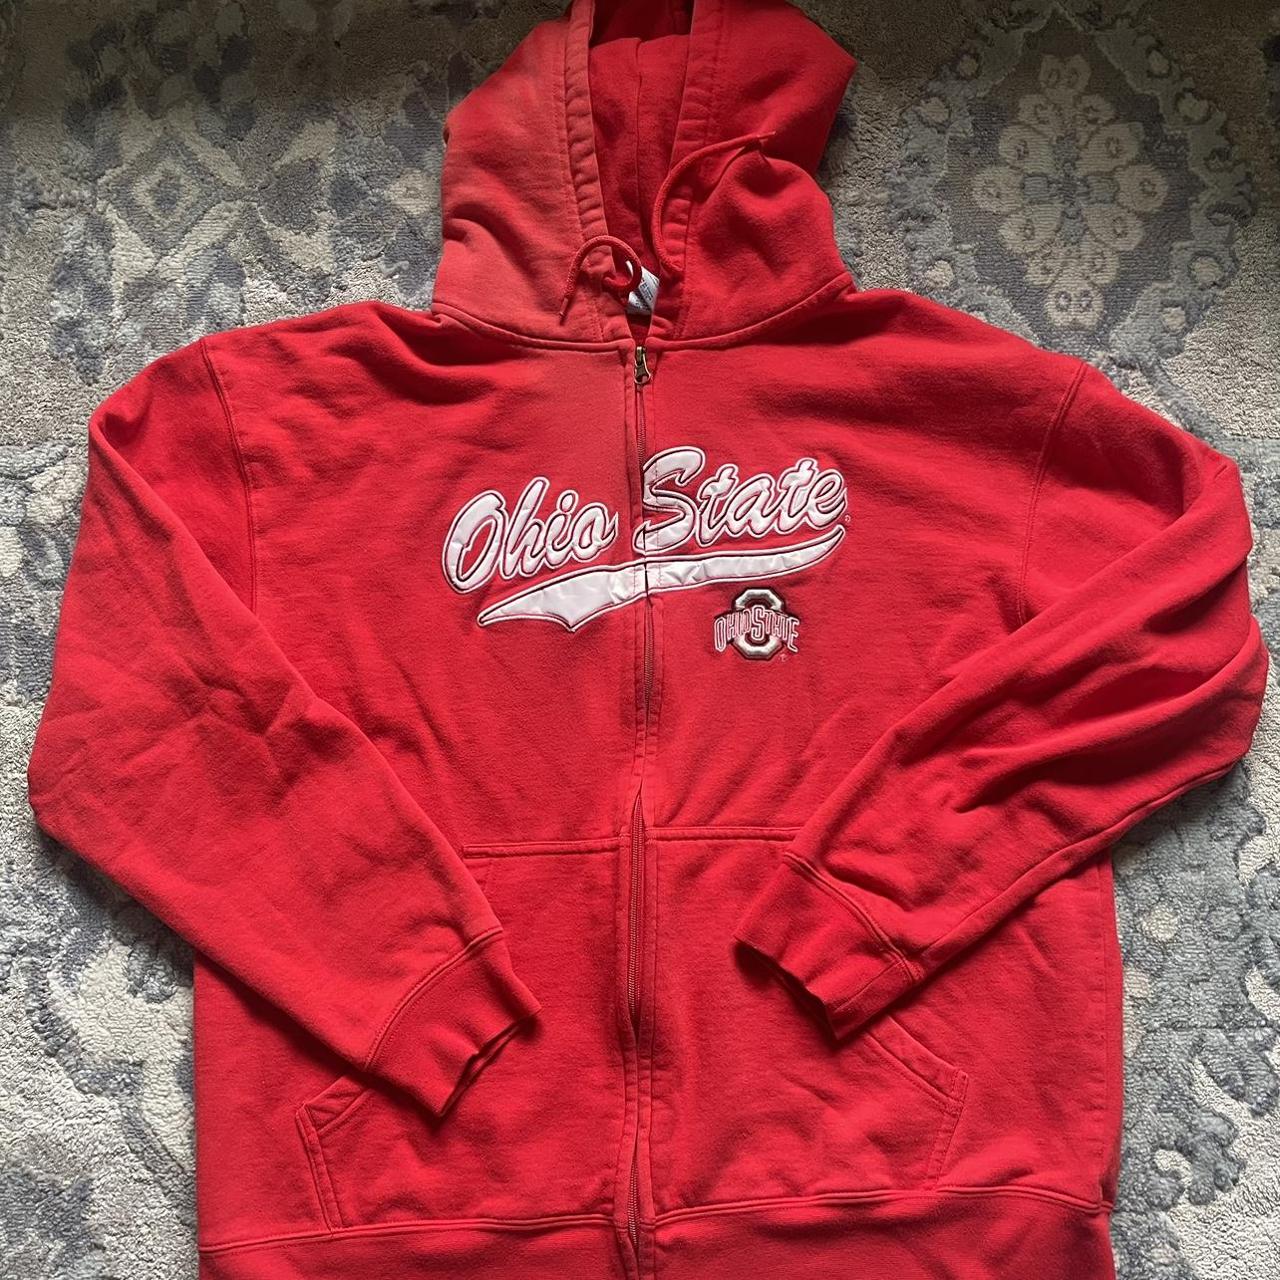 Ohio State Zip up Size Large Great condition no... - Depop